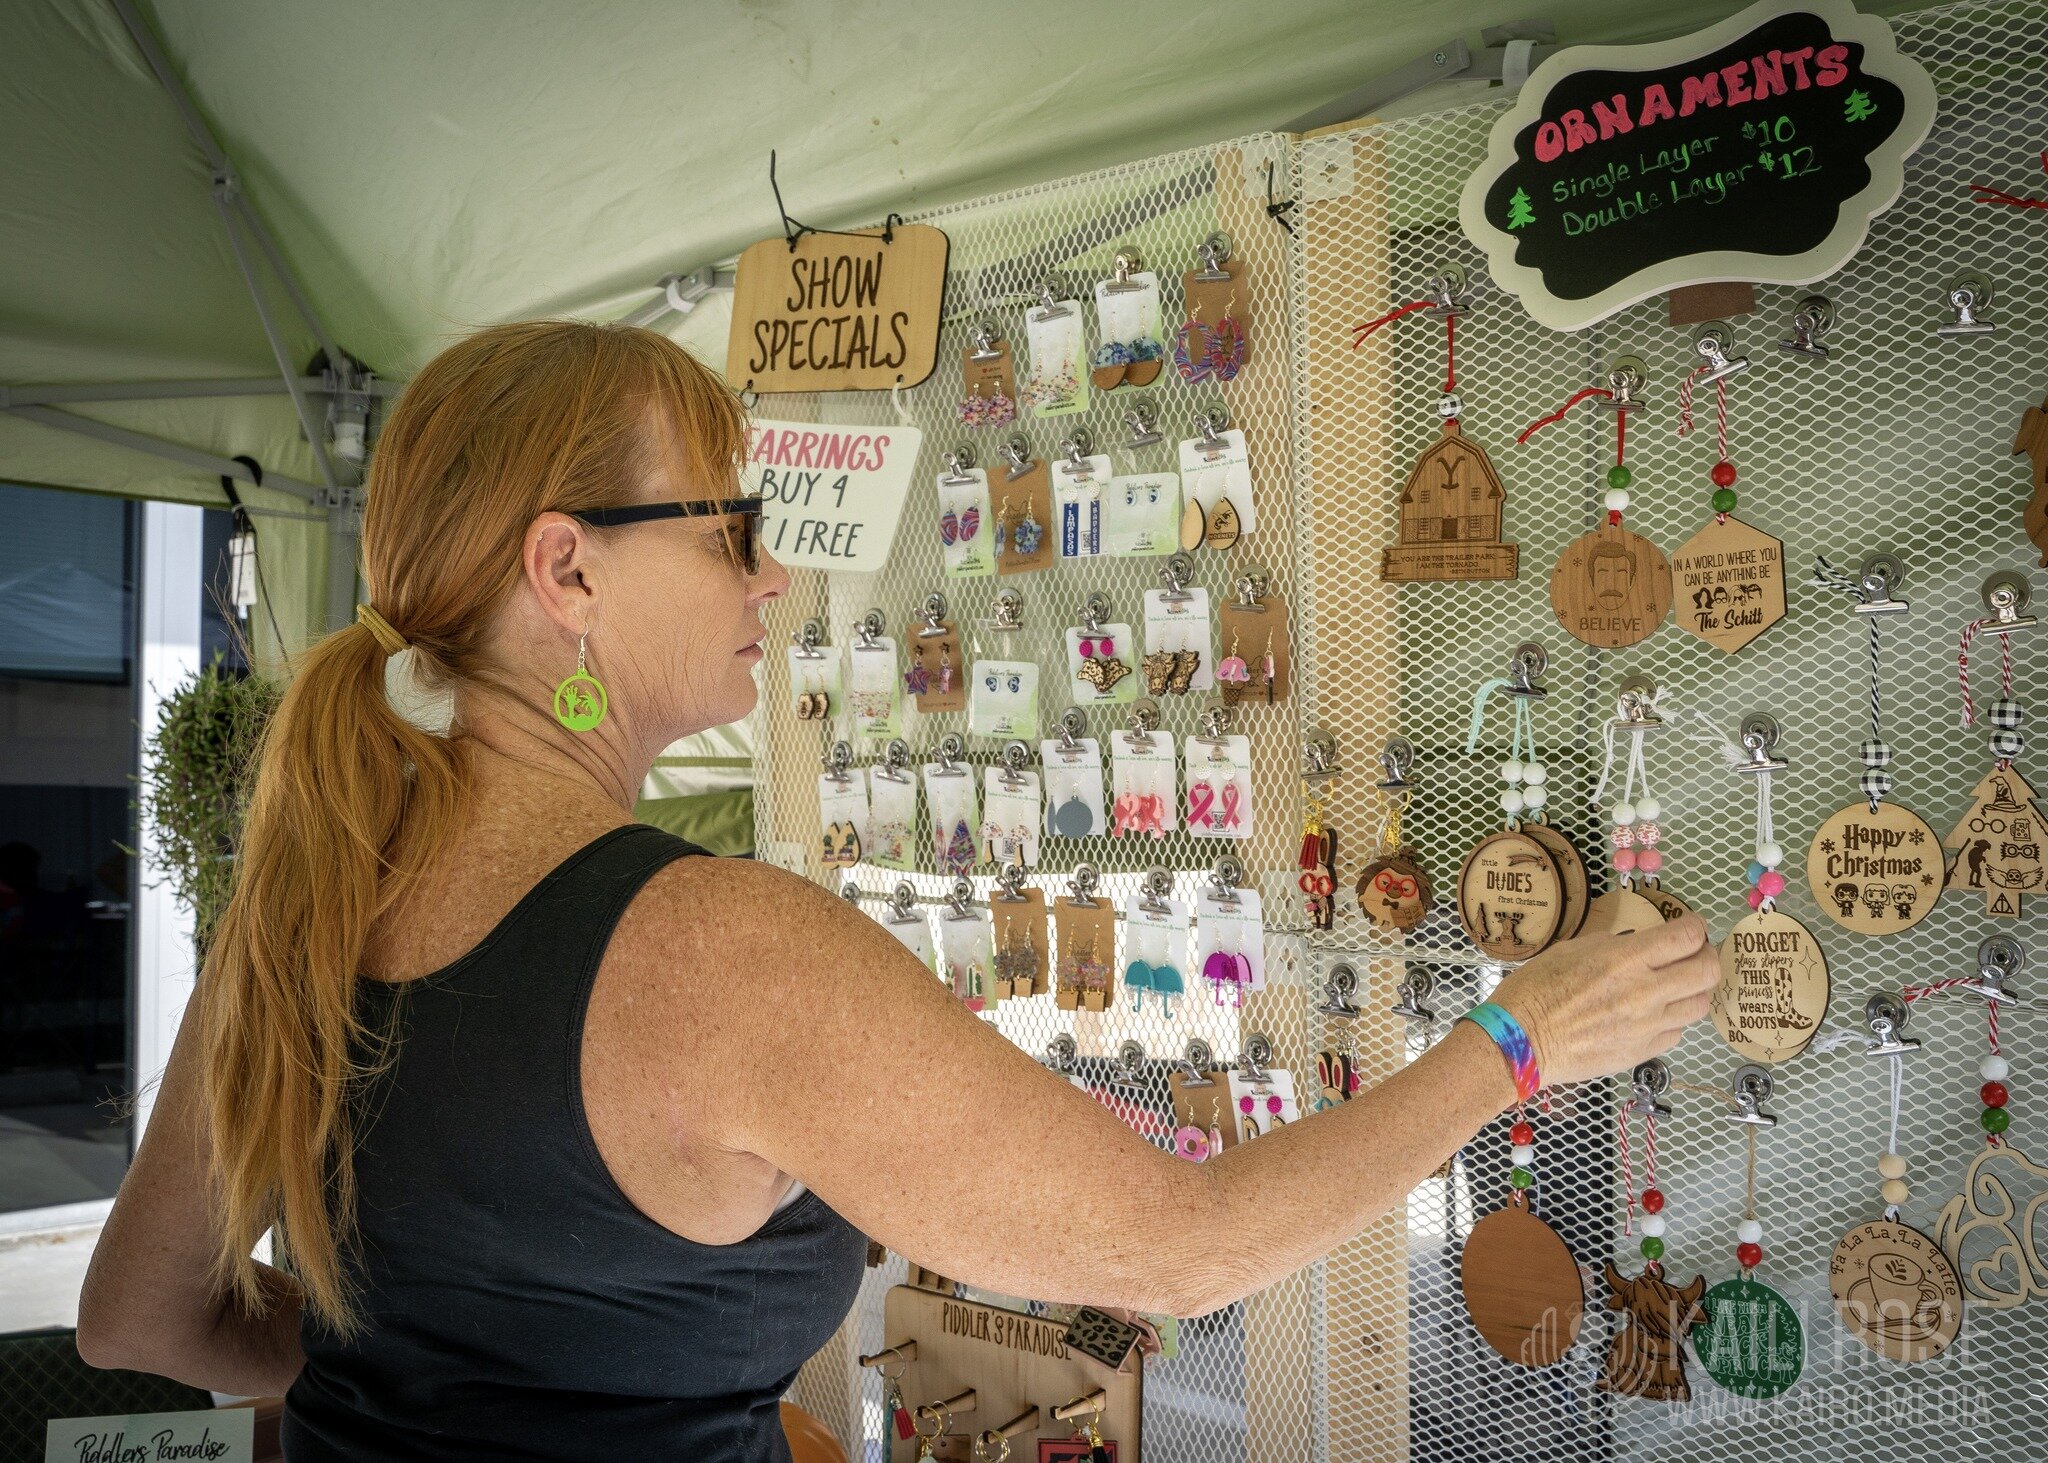 Please welcome back @piddlersparadisetx  to our market! Those that came out to our October market got to meet this awesome vendor and her acrylic and wood earrings, ornaments, keychains, bookmarks, baby items, and so much more! I have to say we go to